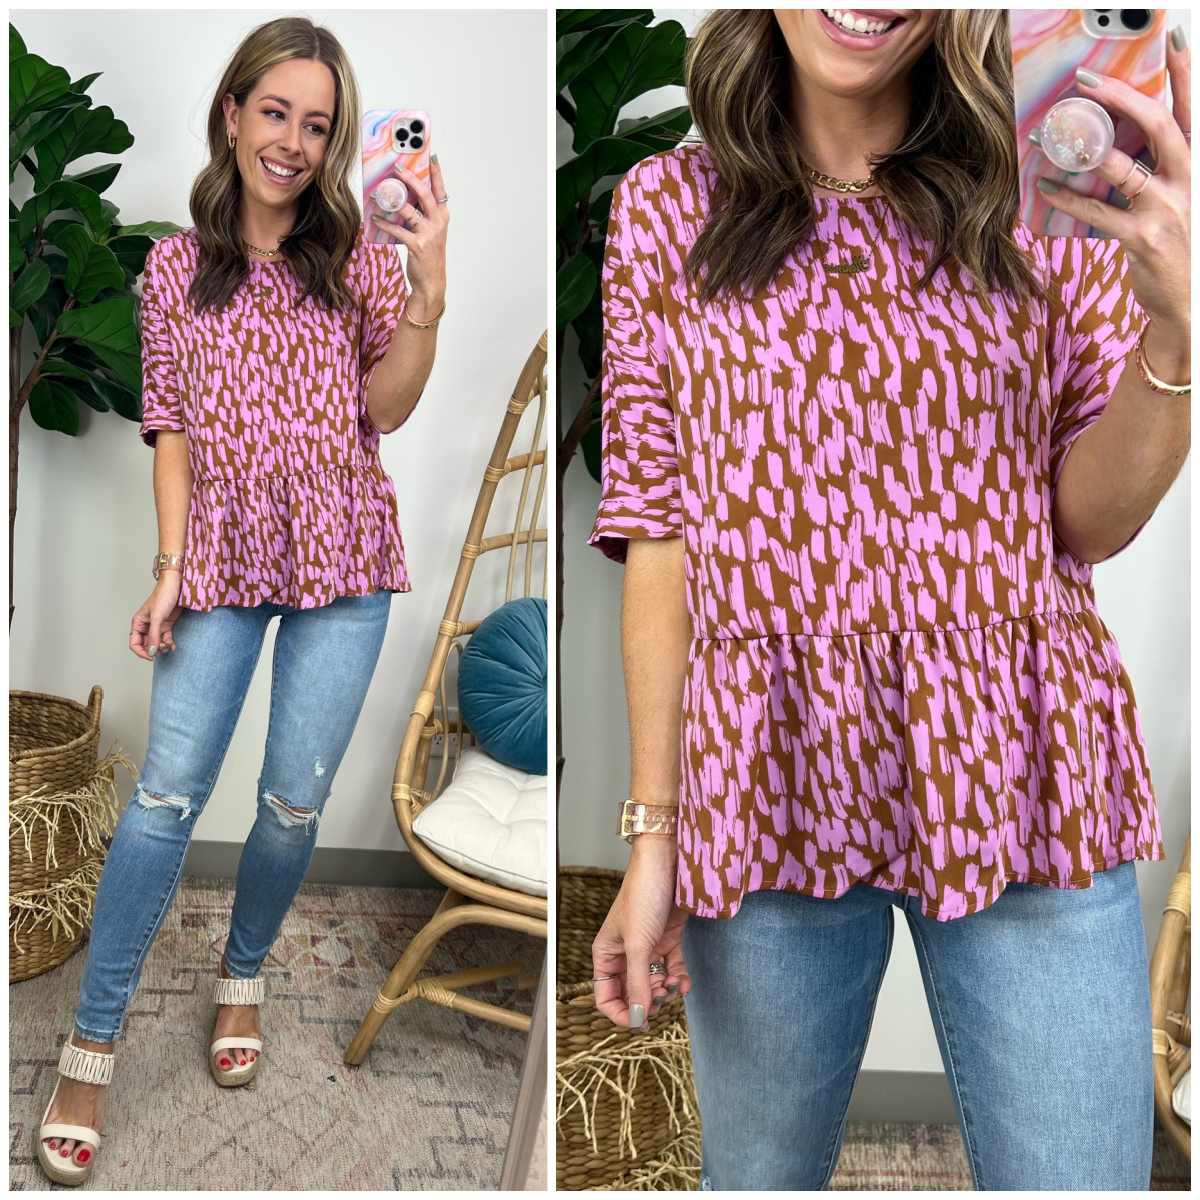  Perfect Image Abstract Brushed Print Ruffle Top - FINAL SALE - Madison and Mallory